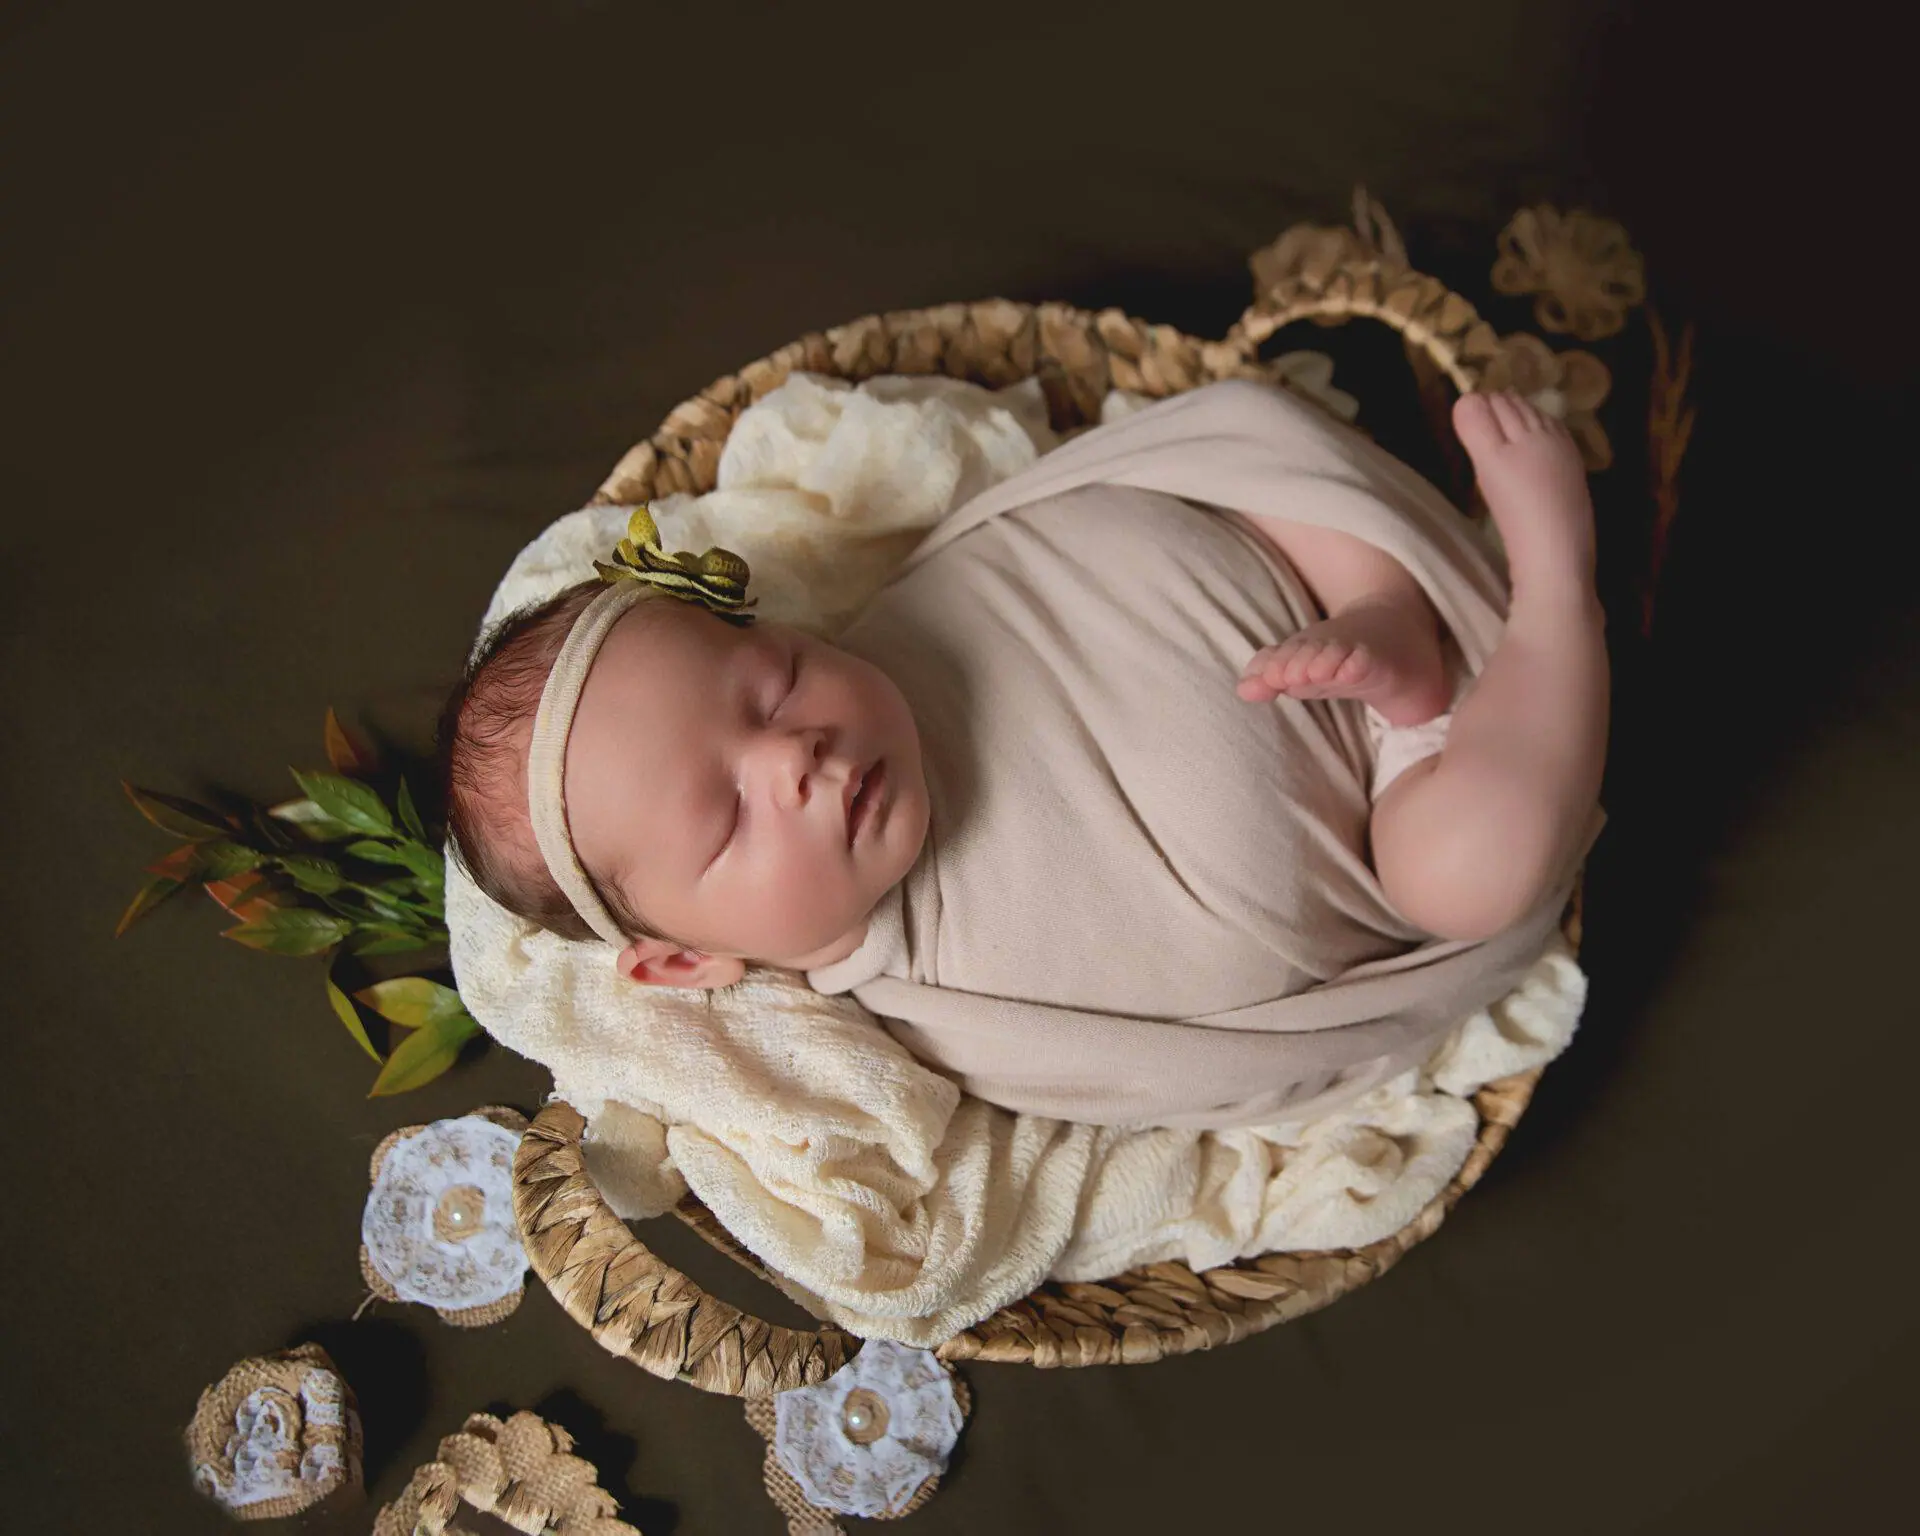 Newborn baby swaddled in cloth, sleeping peacefully in a woven basket with decorative elements, captured during a family photography session in Saint Paul, Minnesota.